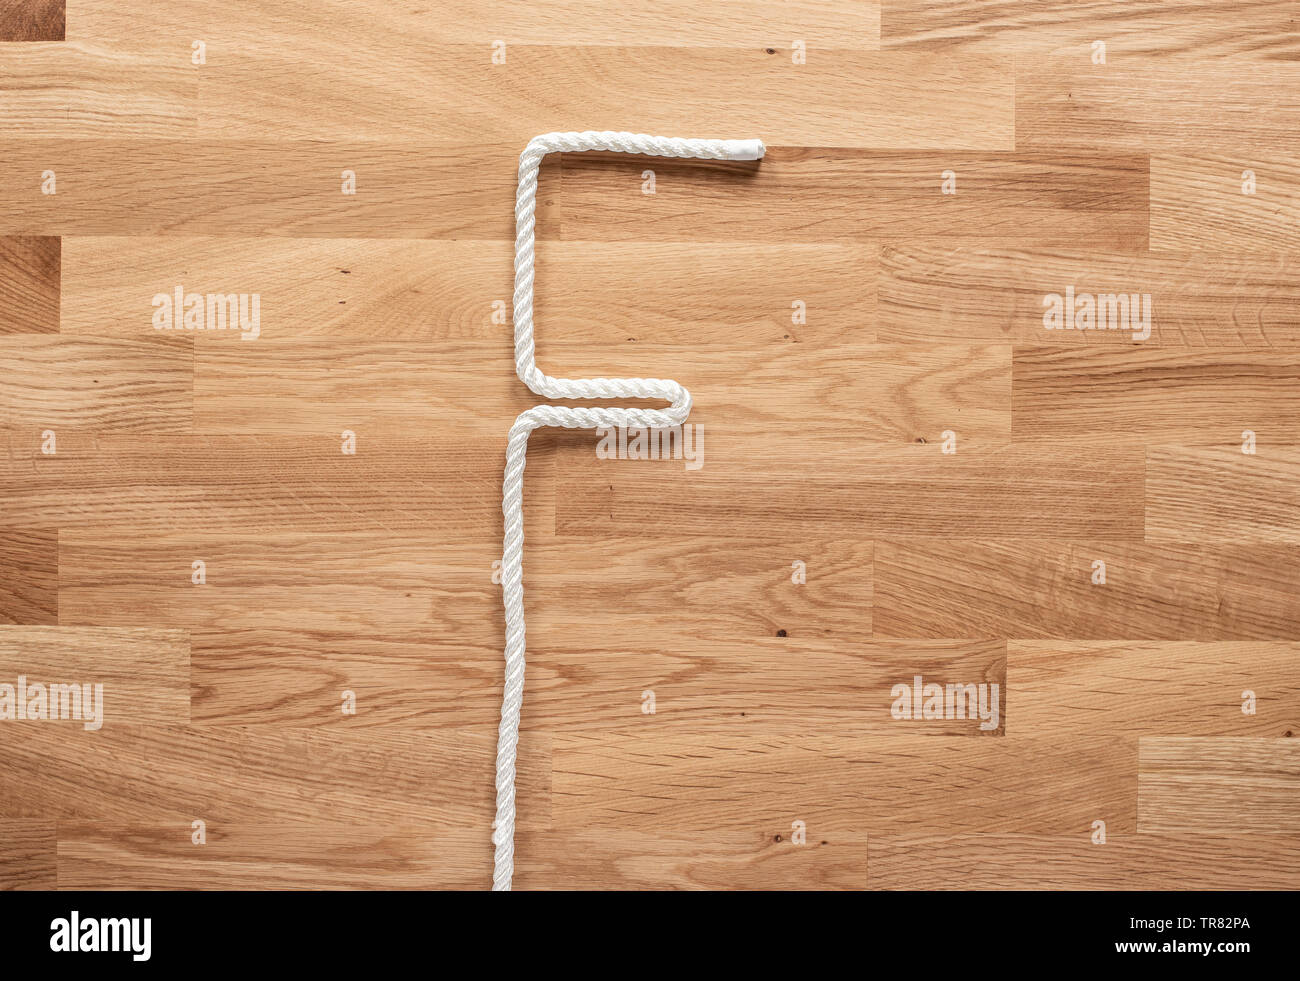 The letter F formed with white rope on a wooden table Stock Photo